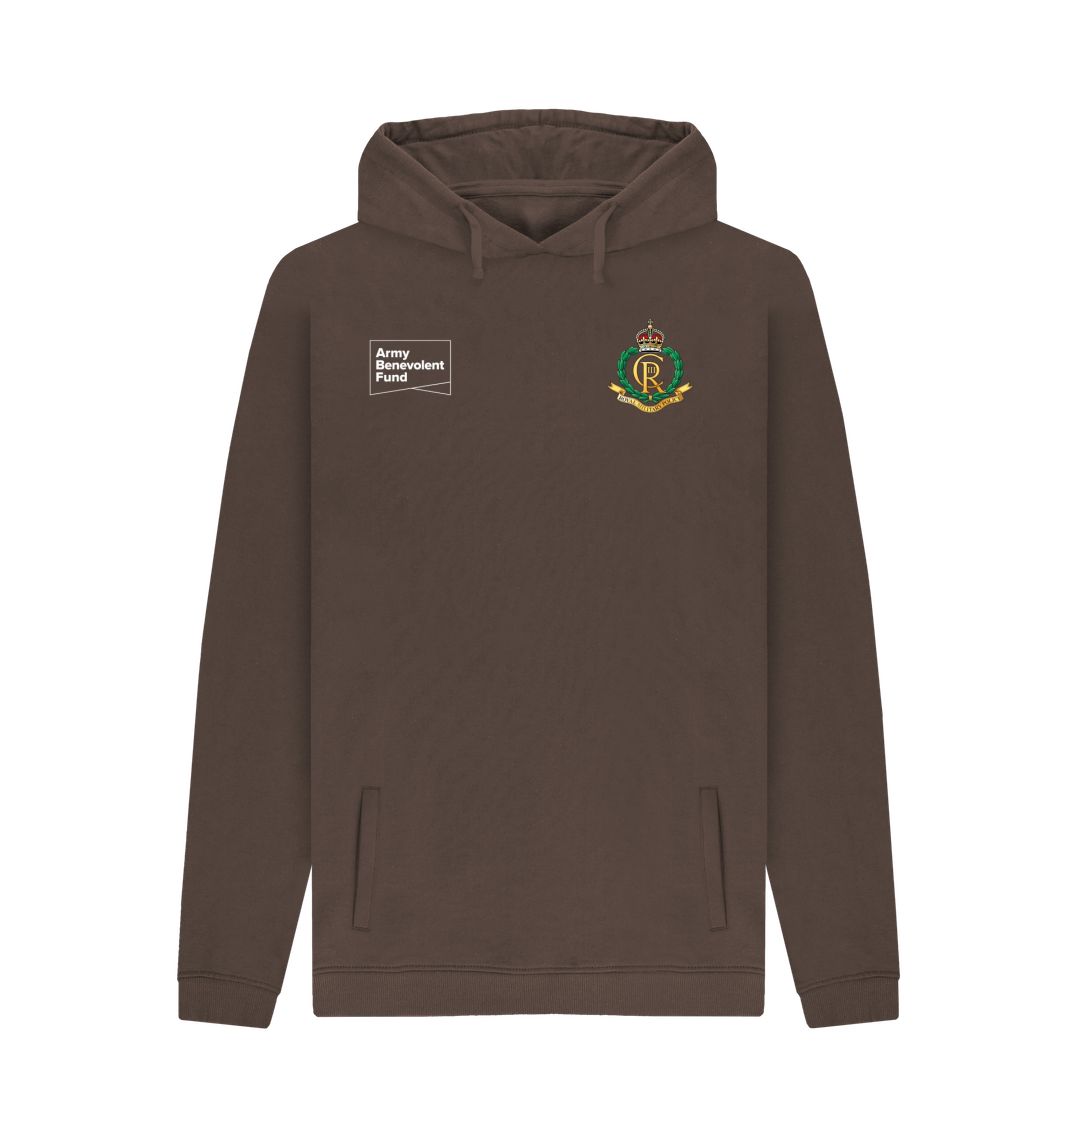 Adjutant General's Corps of Royal Military Police Unisex Hoodie - Army Benevolent Fund